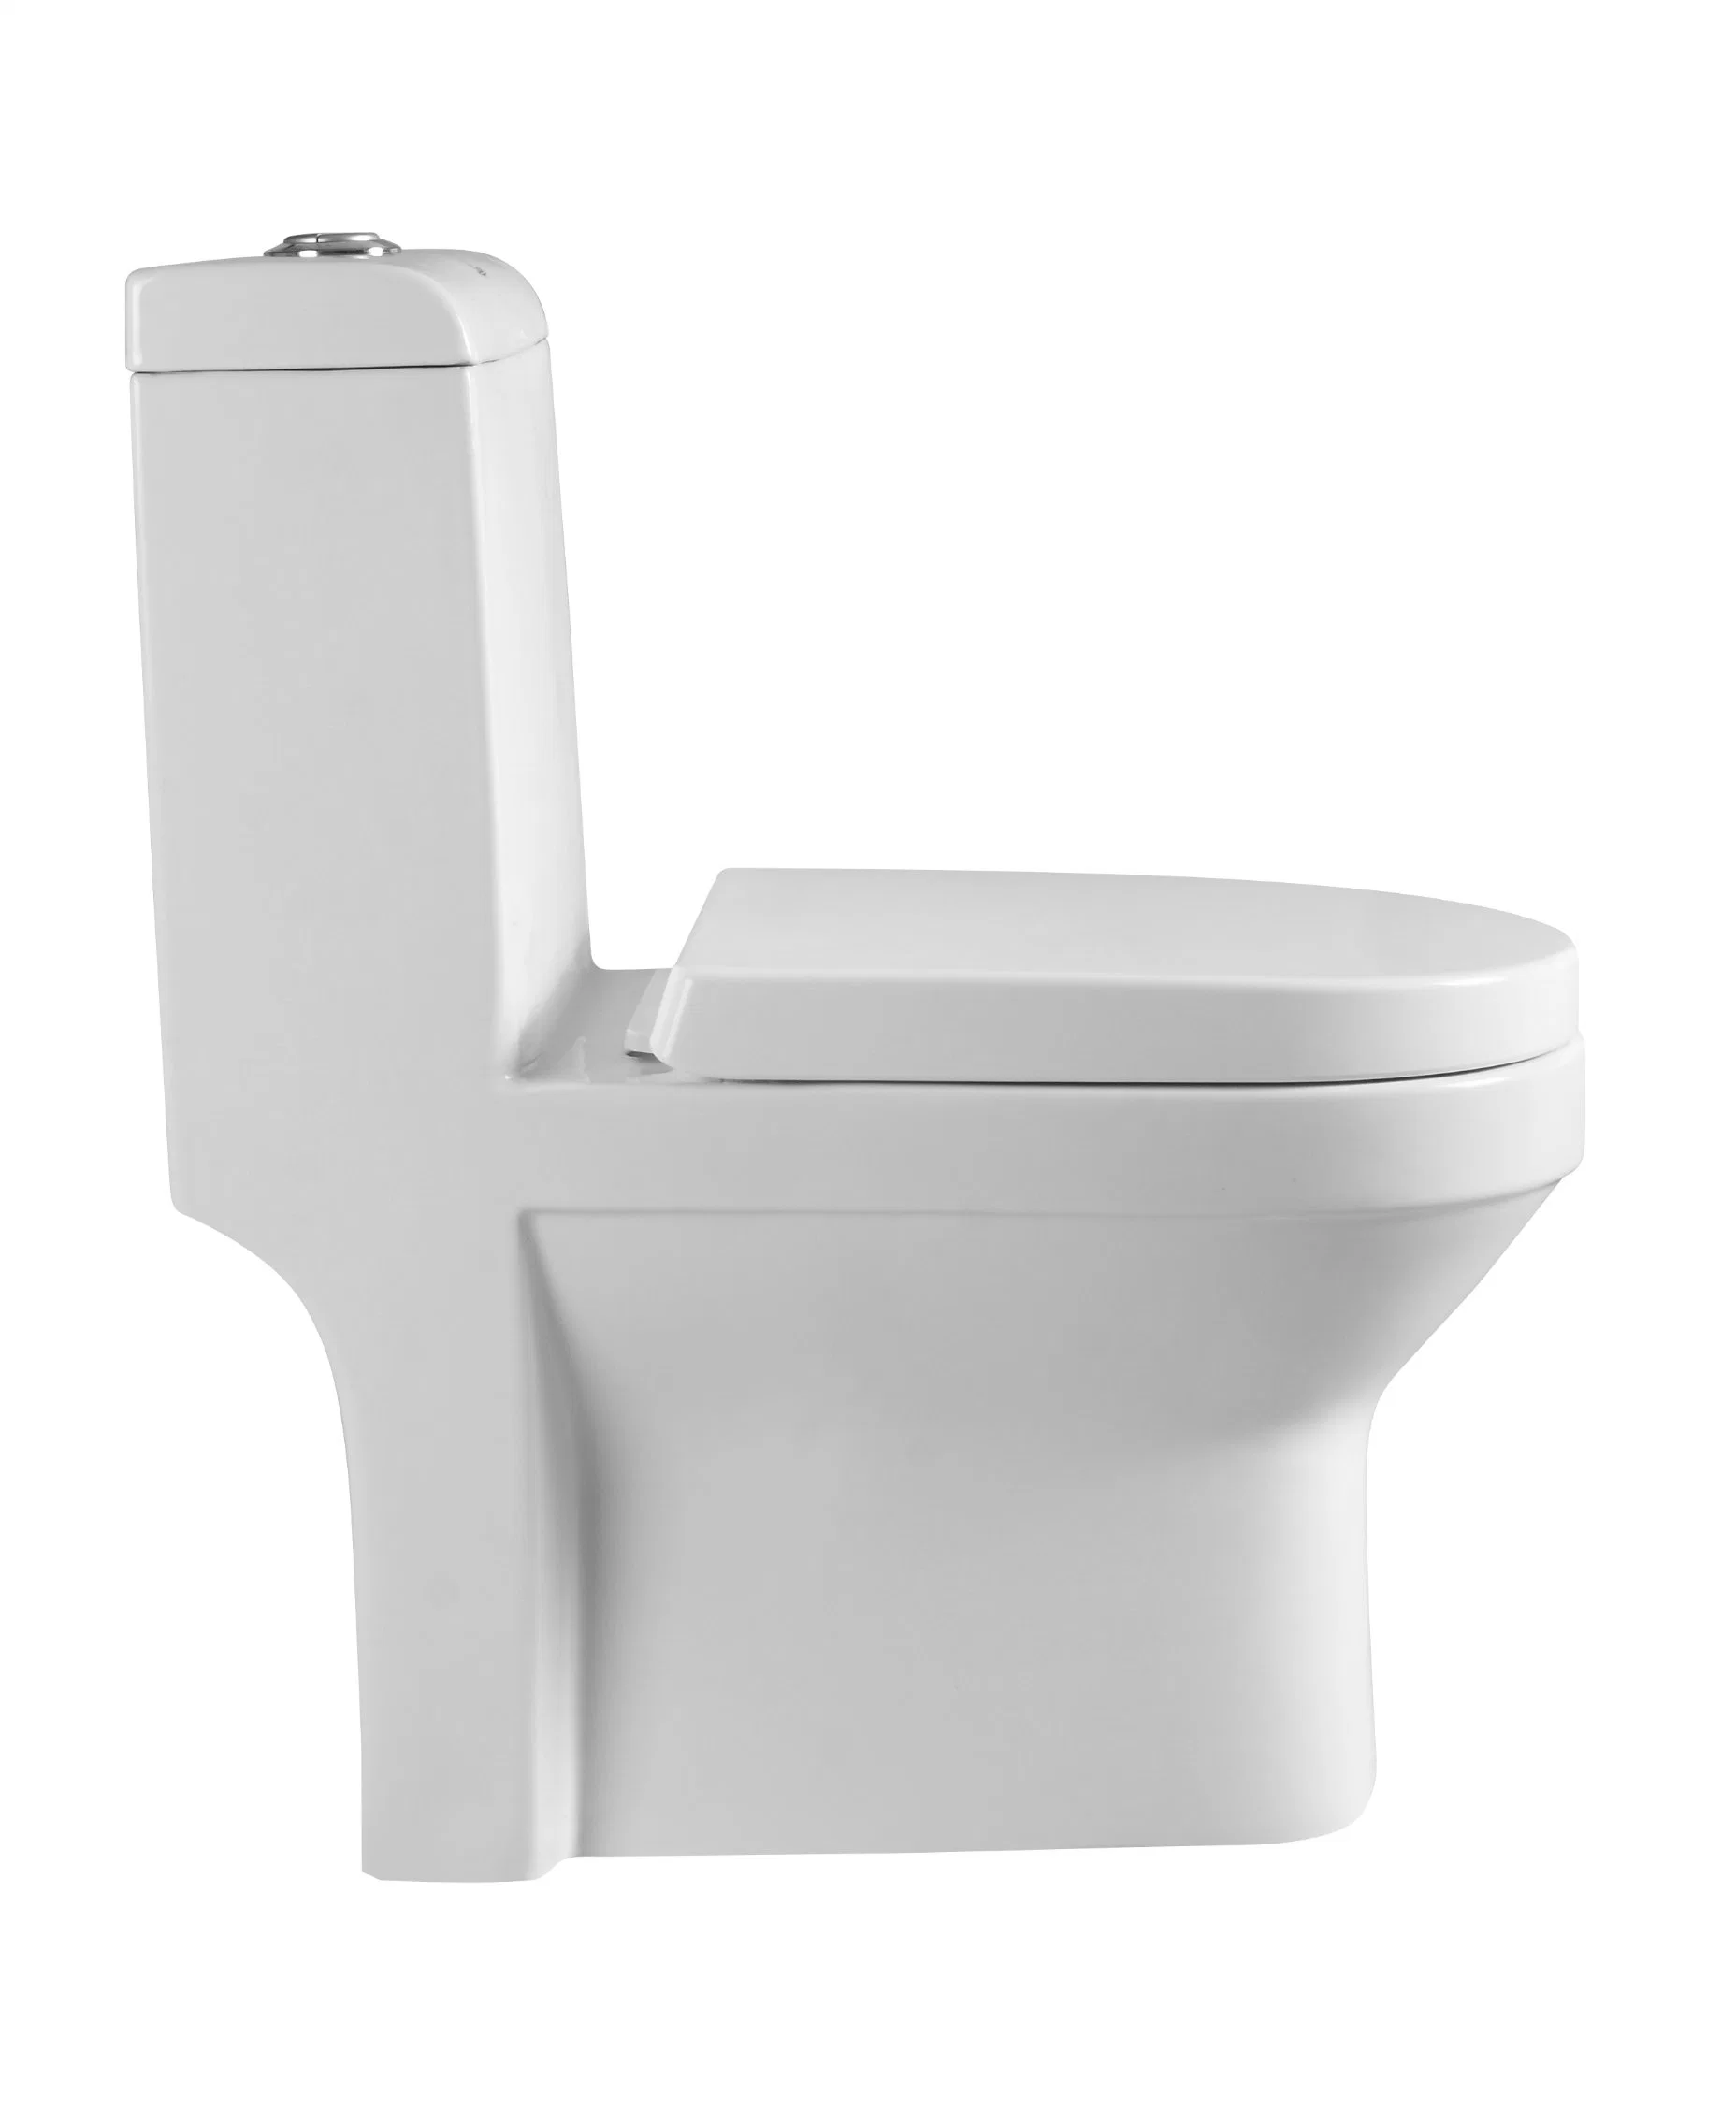 Low Prices Ceramics Dual Flushing System Complete Accessories Muslim Best Anglo Indian Fashion Toilet (PL-3858)